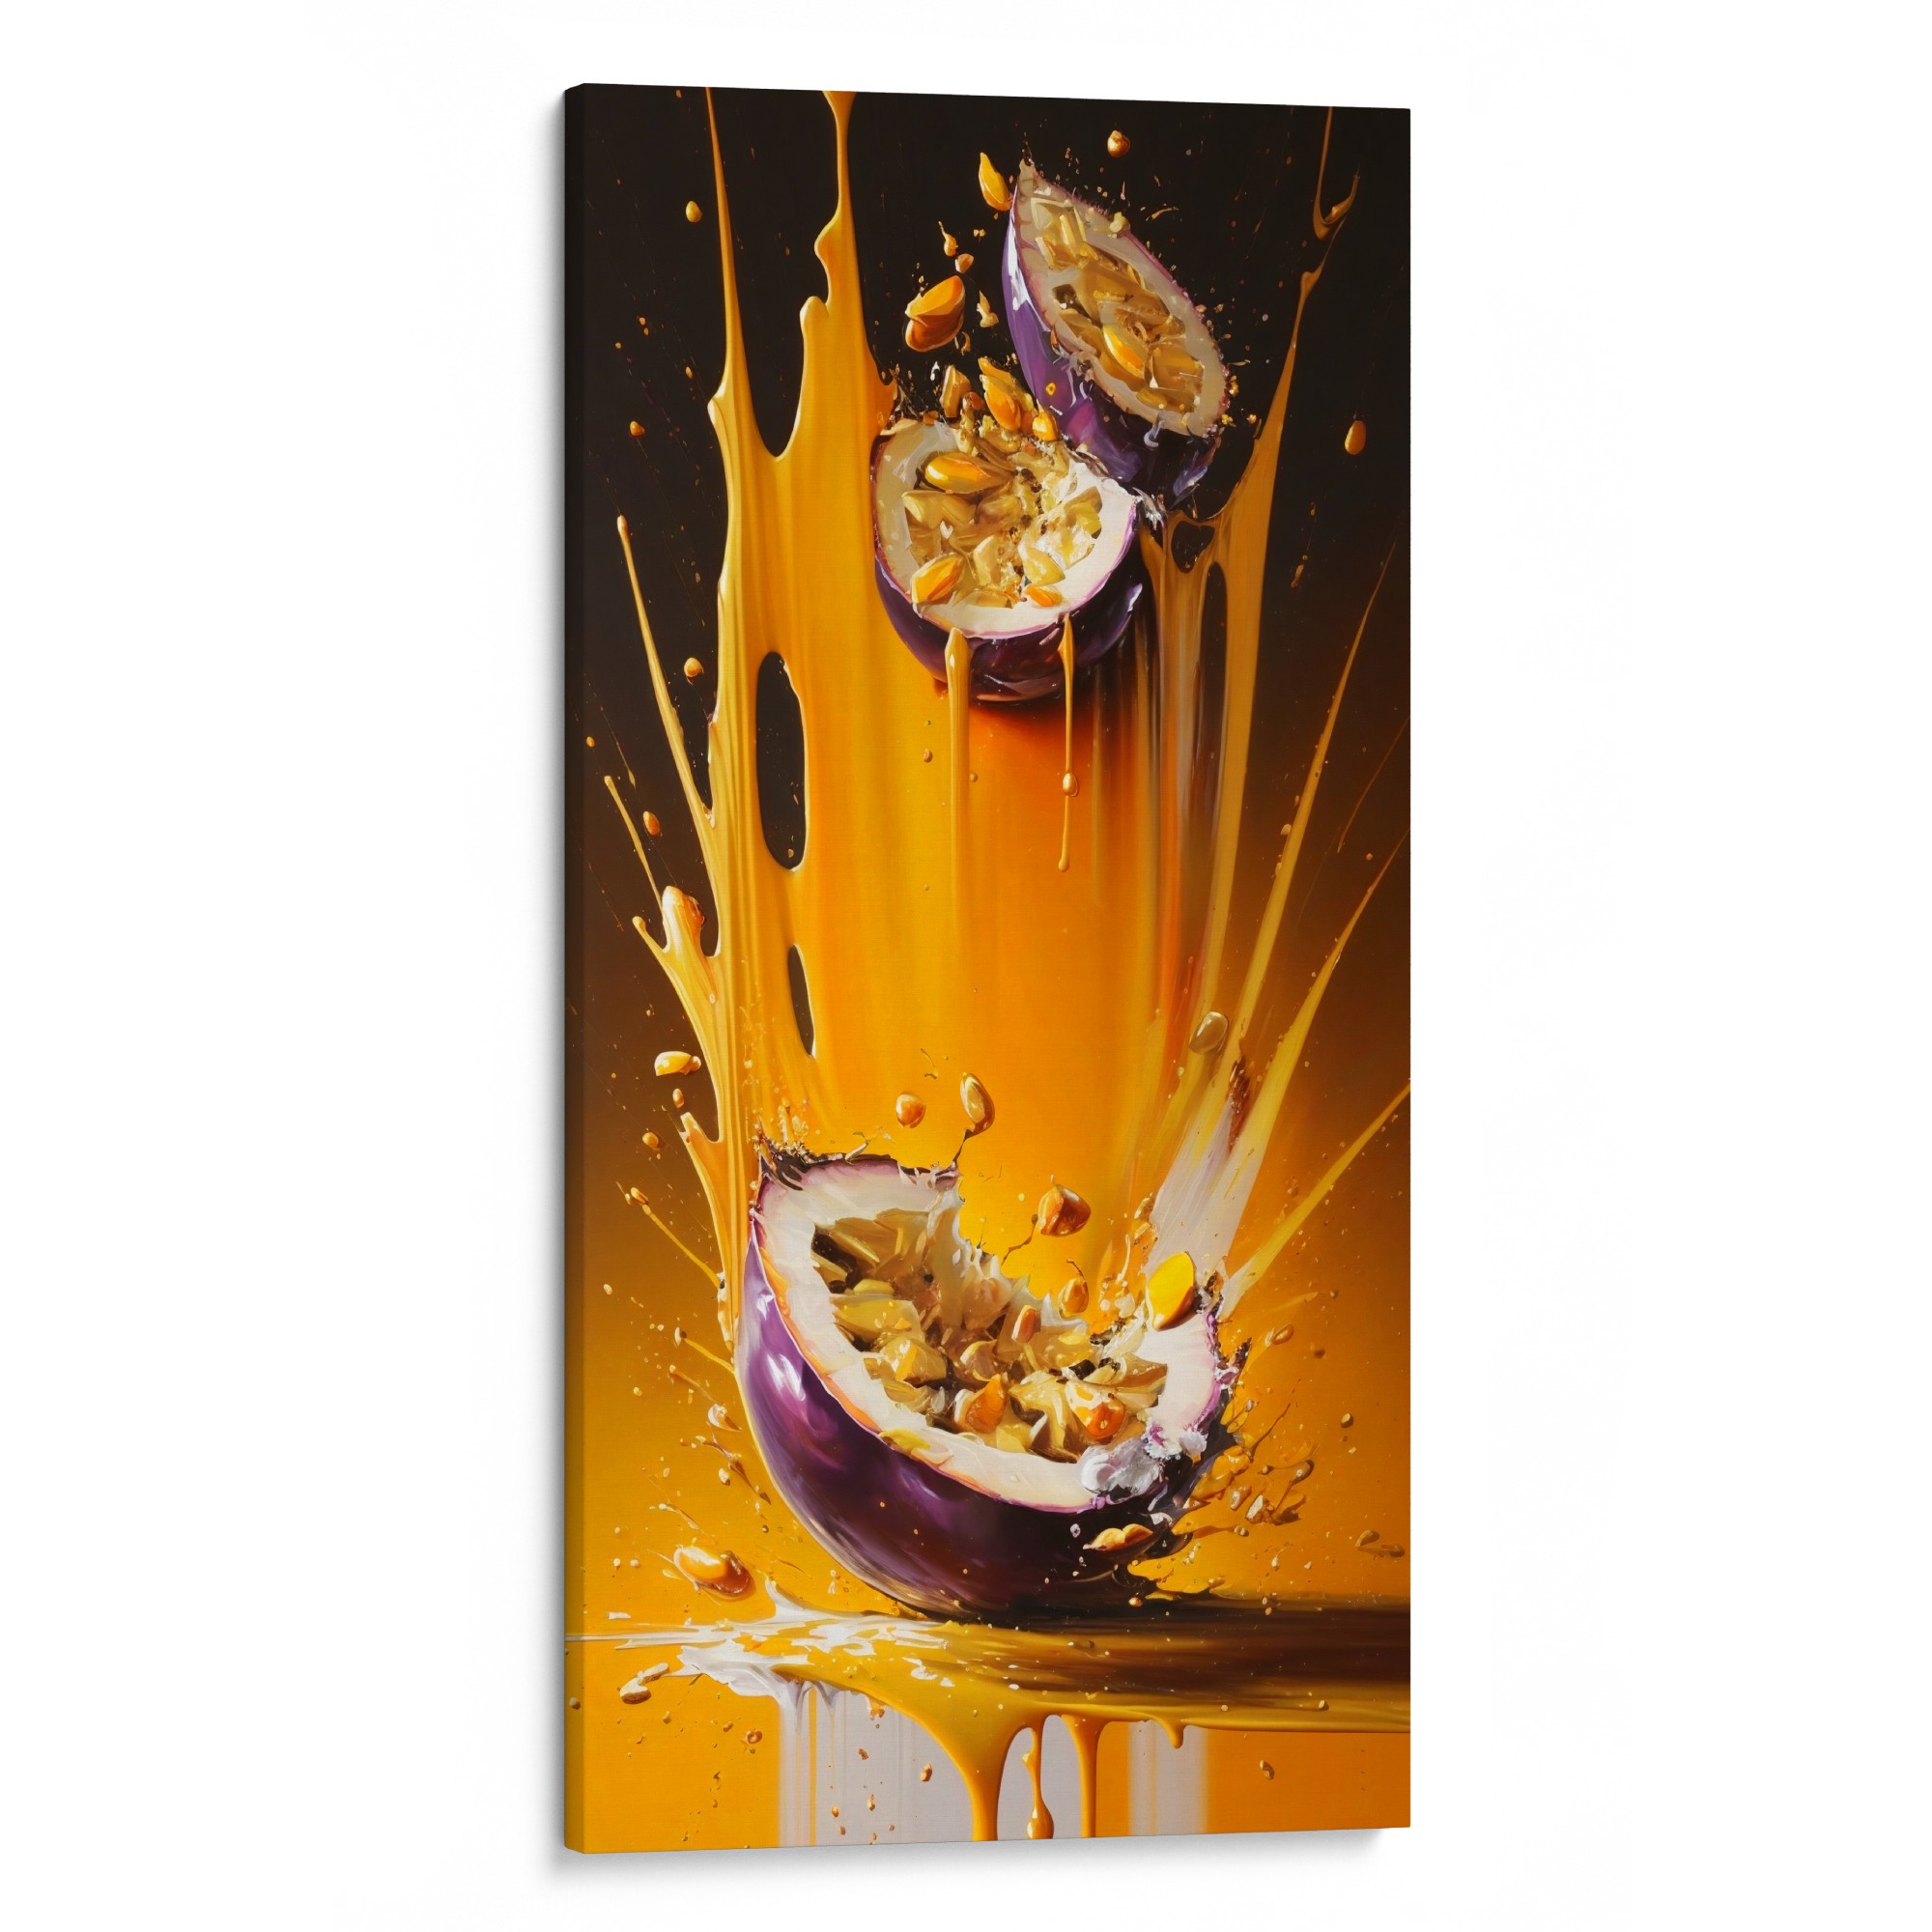 PASSION PALETTE Canvas for Sale - Fervent touch for modern home design.